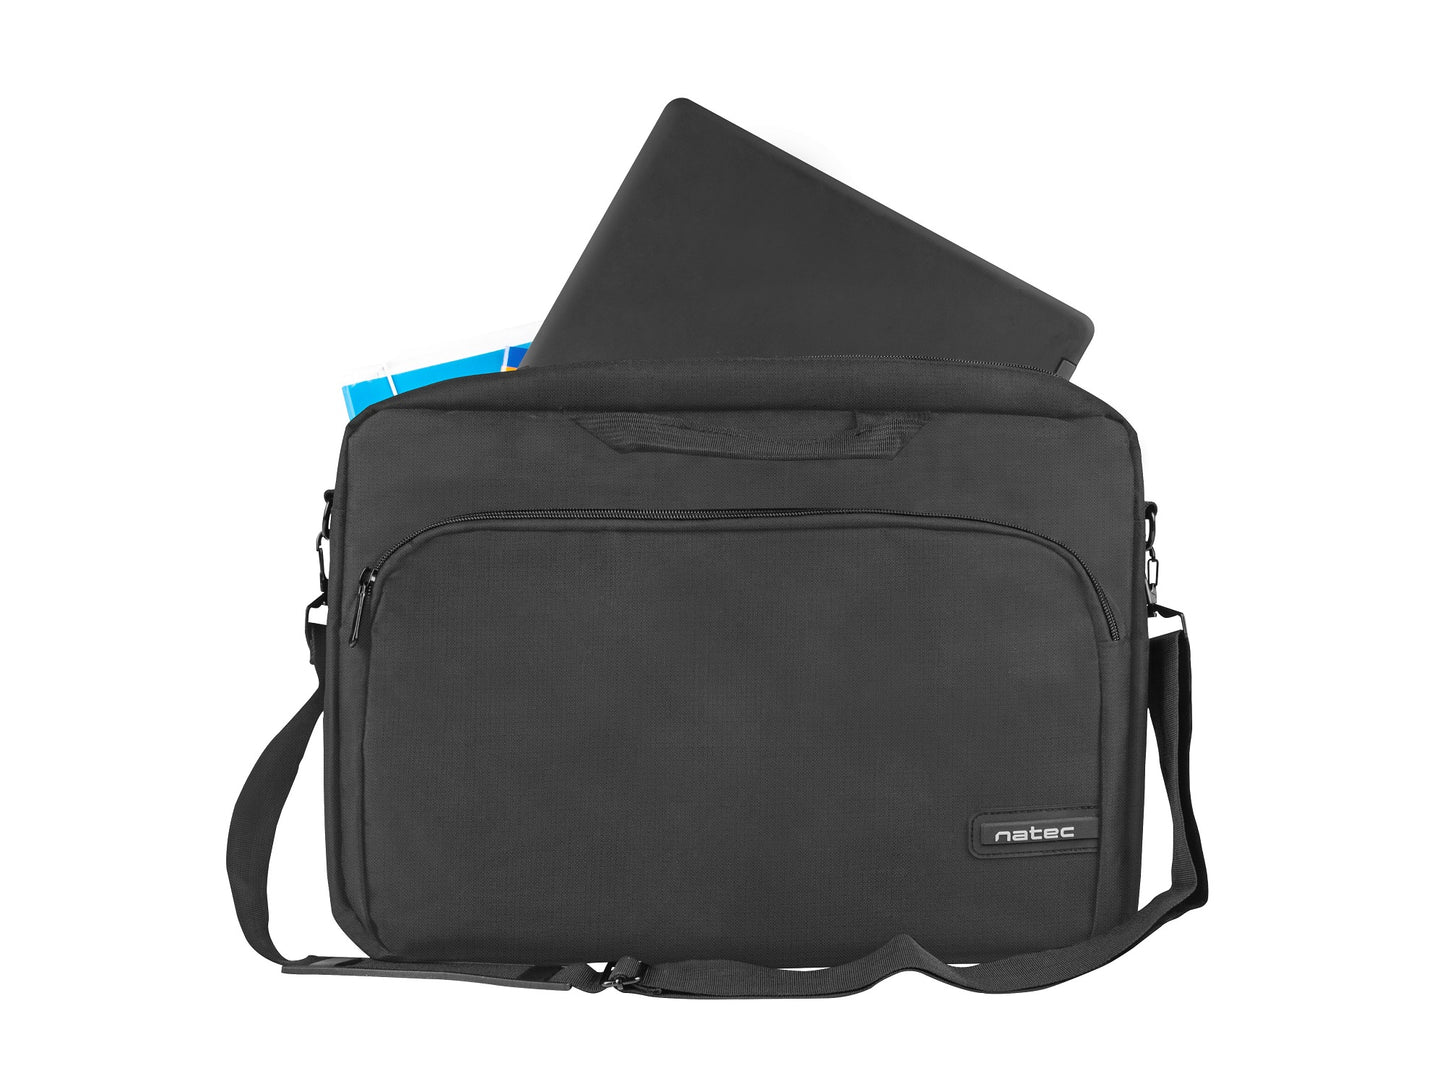 Natec WALLAROO Topload Laptop Bag With Wirelss Mouse